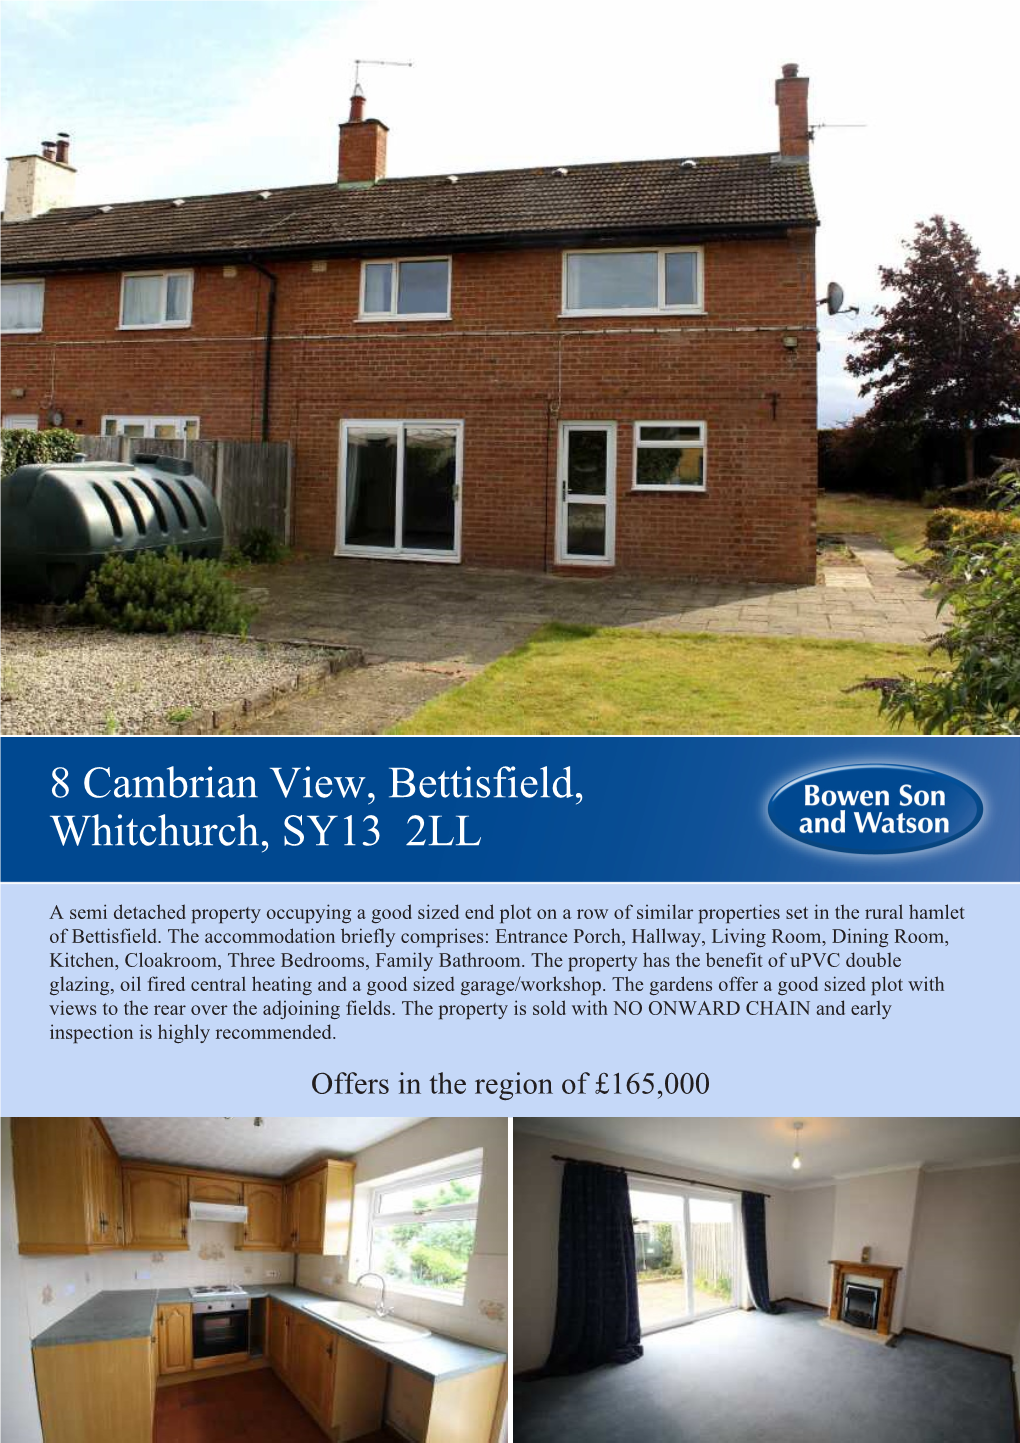 8 Cambrian View, Bettisfield, Whitchurch, SY13 2LL